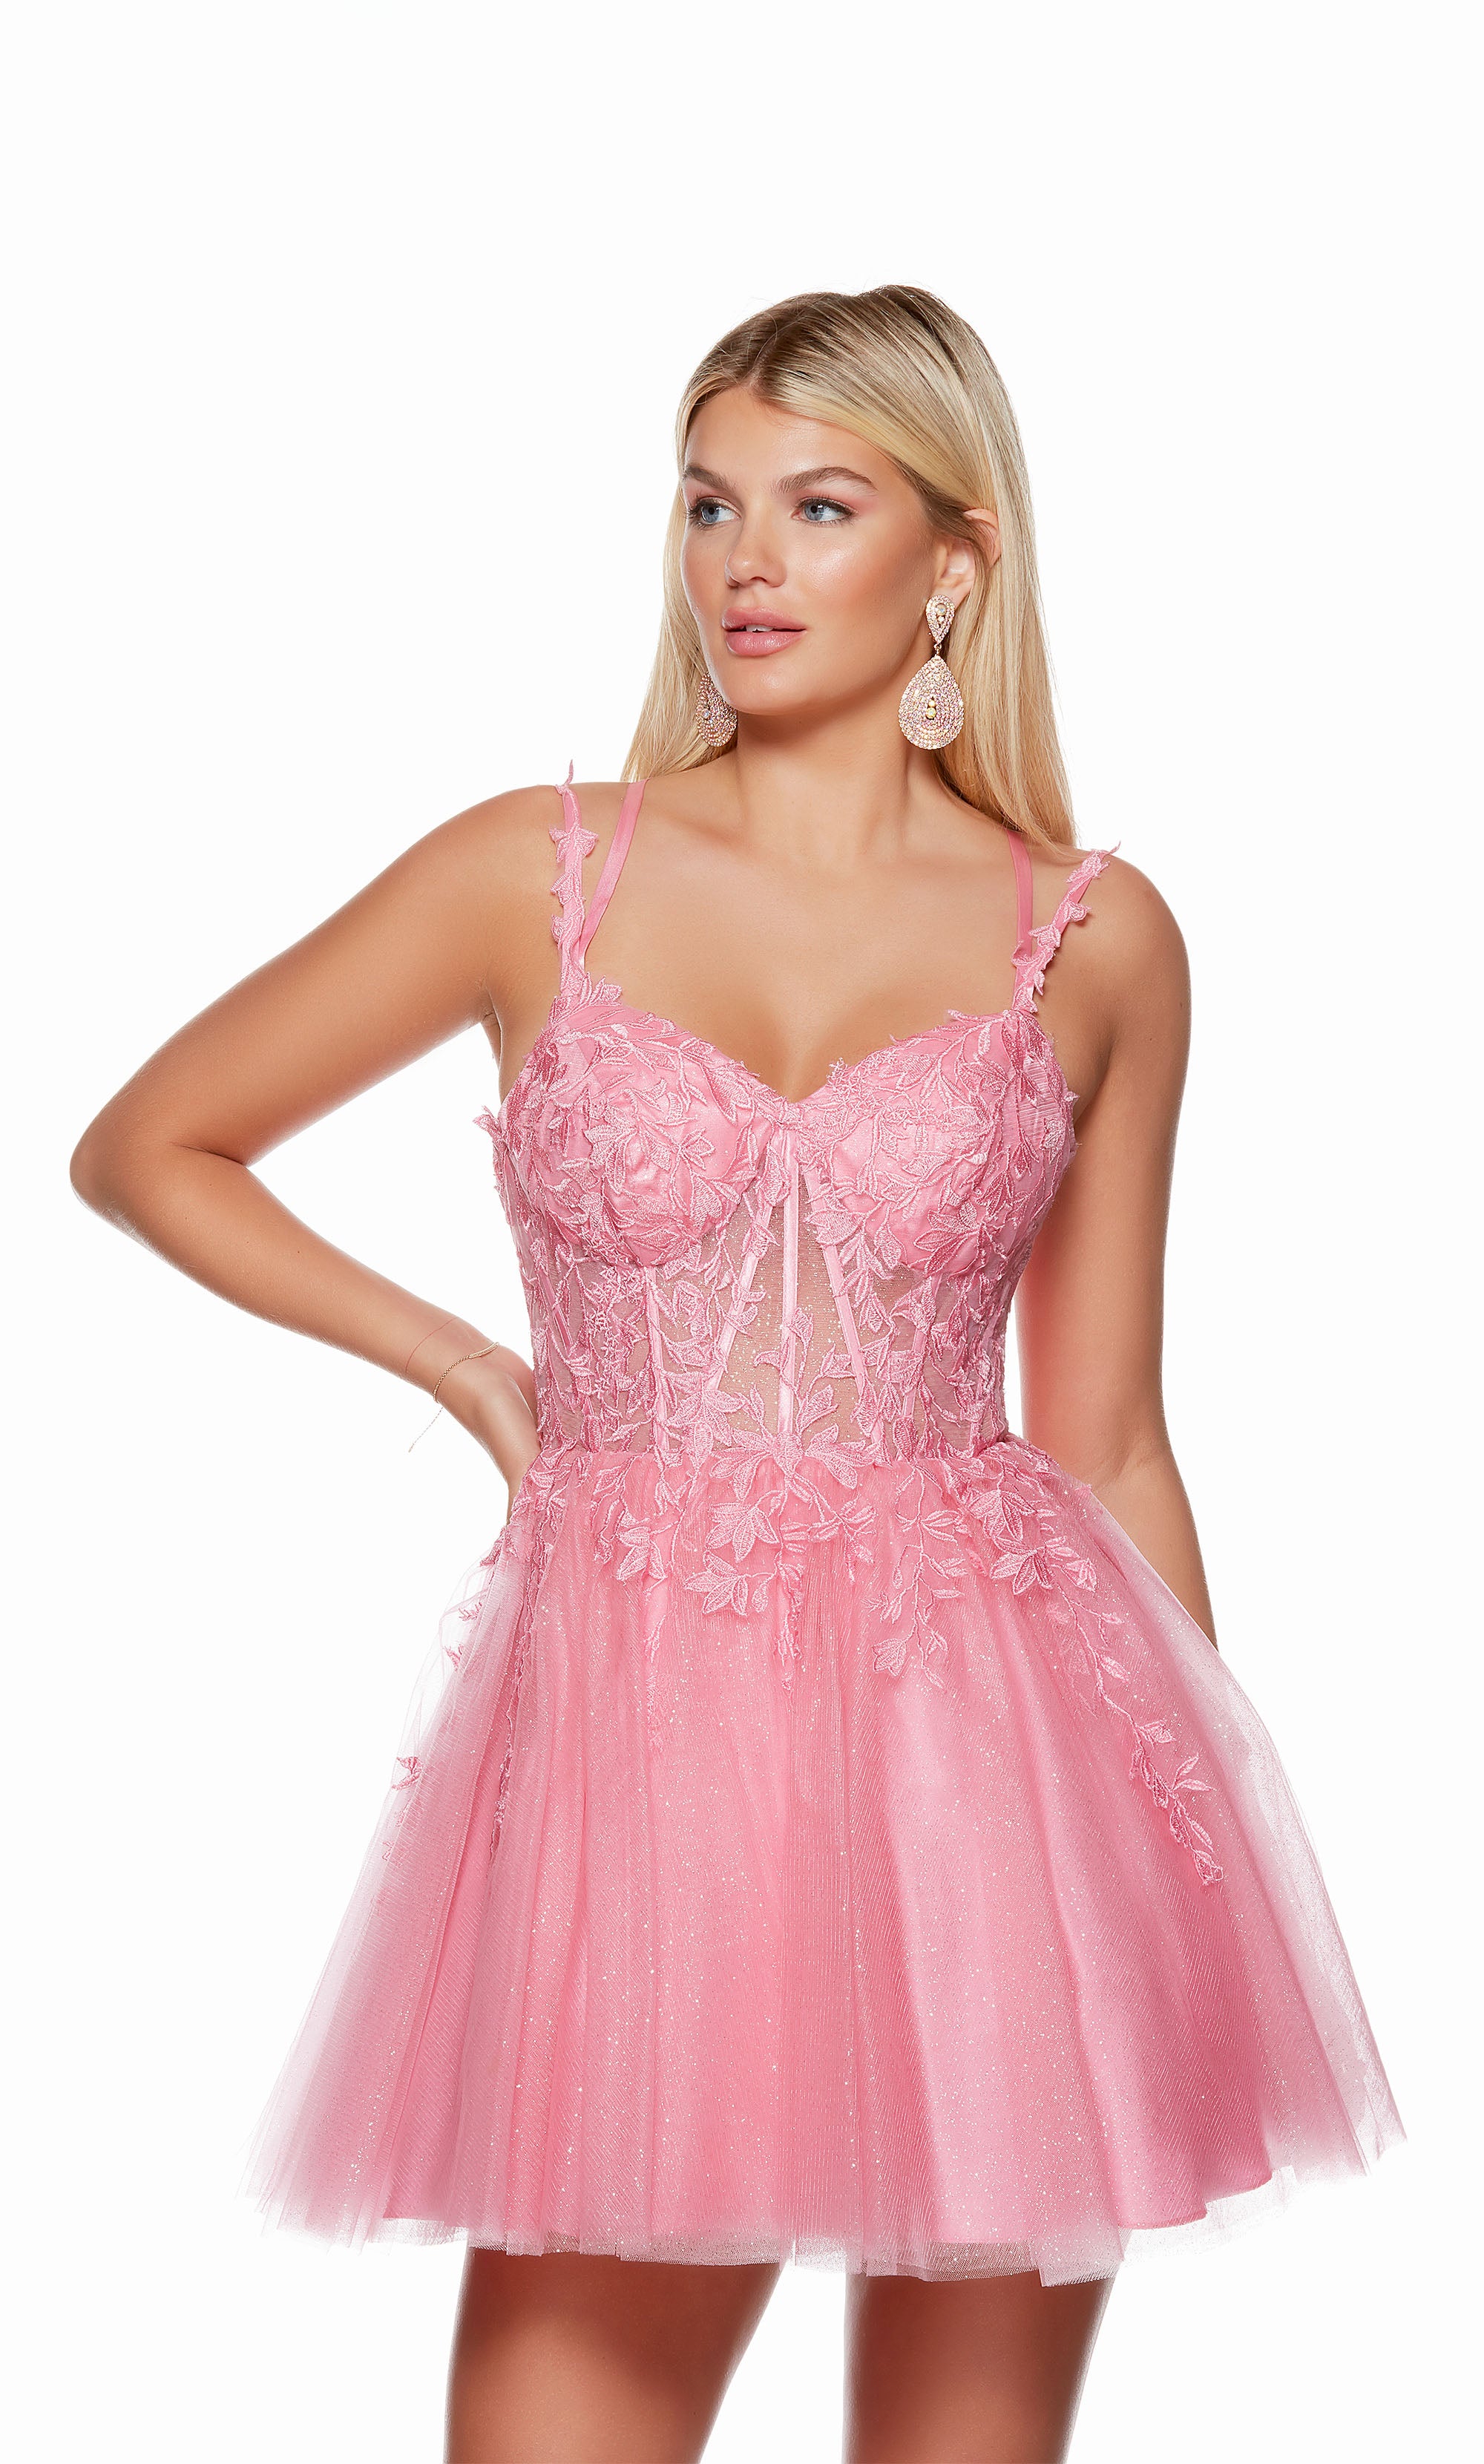 A pink sparkly corset dress, featuring a sweetheart neckline, sheer bodice with lace appliques, and a lace up back, perfect for homecoming.